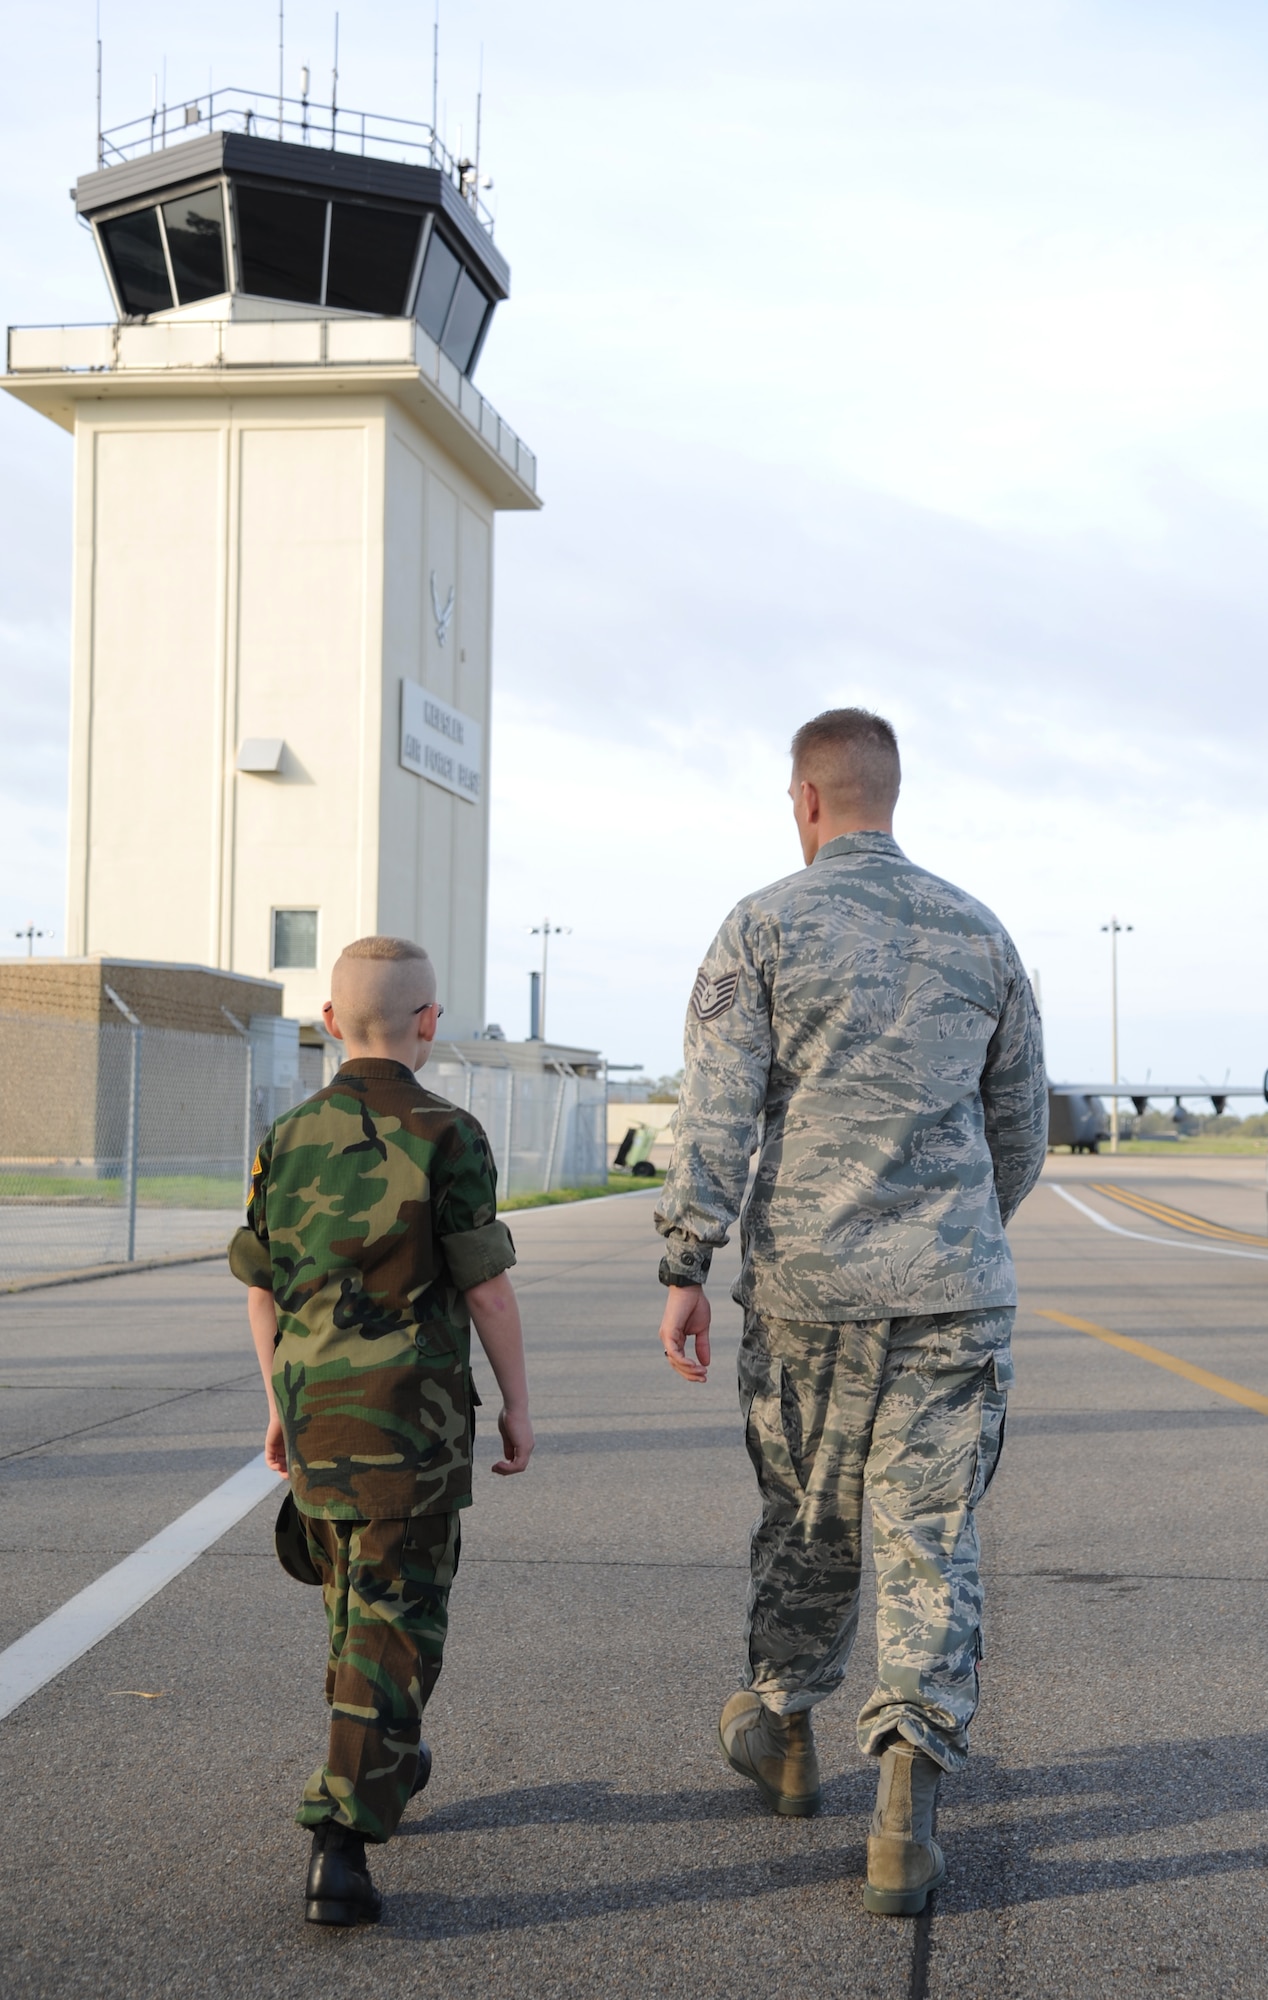 Eleven-year-old Cody Jackson is escorted by Tech. Sgt. David Hough, 81st Operation Support Flight, to tour the air traffic control tower March 27, 2014, Keesler Air Force Base, Miss.  Jackson, from Alpharetta, Ga., is known as "One Boy USO" for his personal mission to thank as many military members as he can, either by shaking hands, welcoming them home or sending packages to deployed troops.  He was accompanied by his parents and staff members from the local chapter of the American Red Cross. (U.S. Air Force photo by Kemberly Groue)